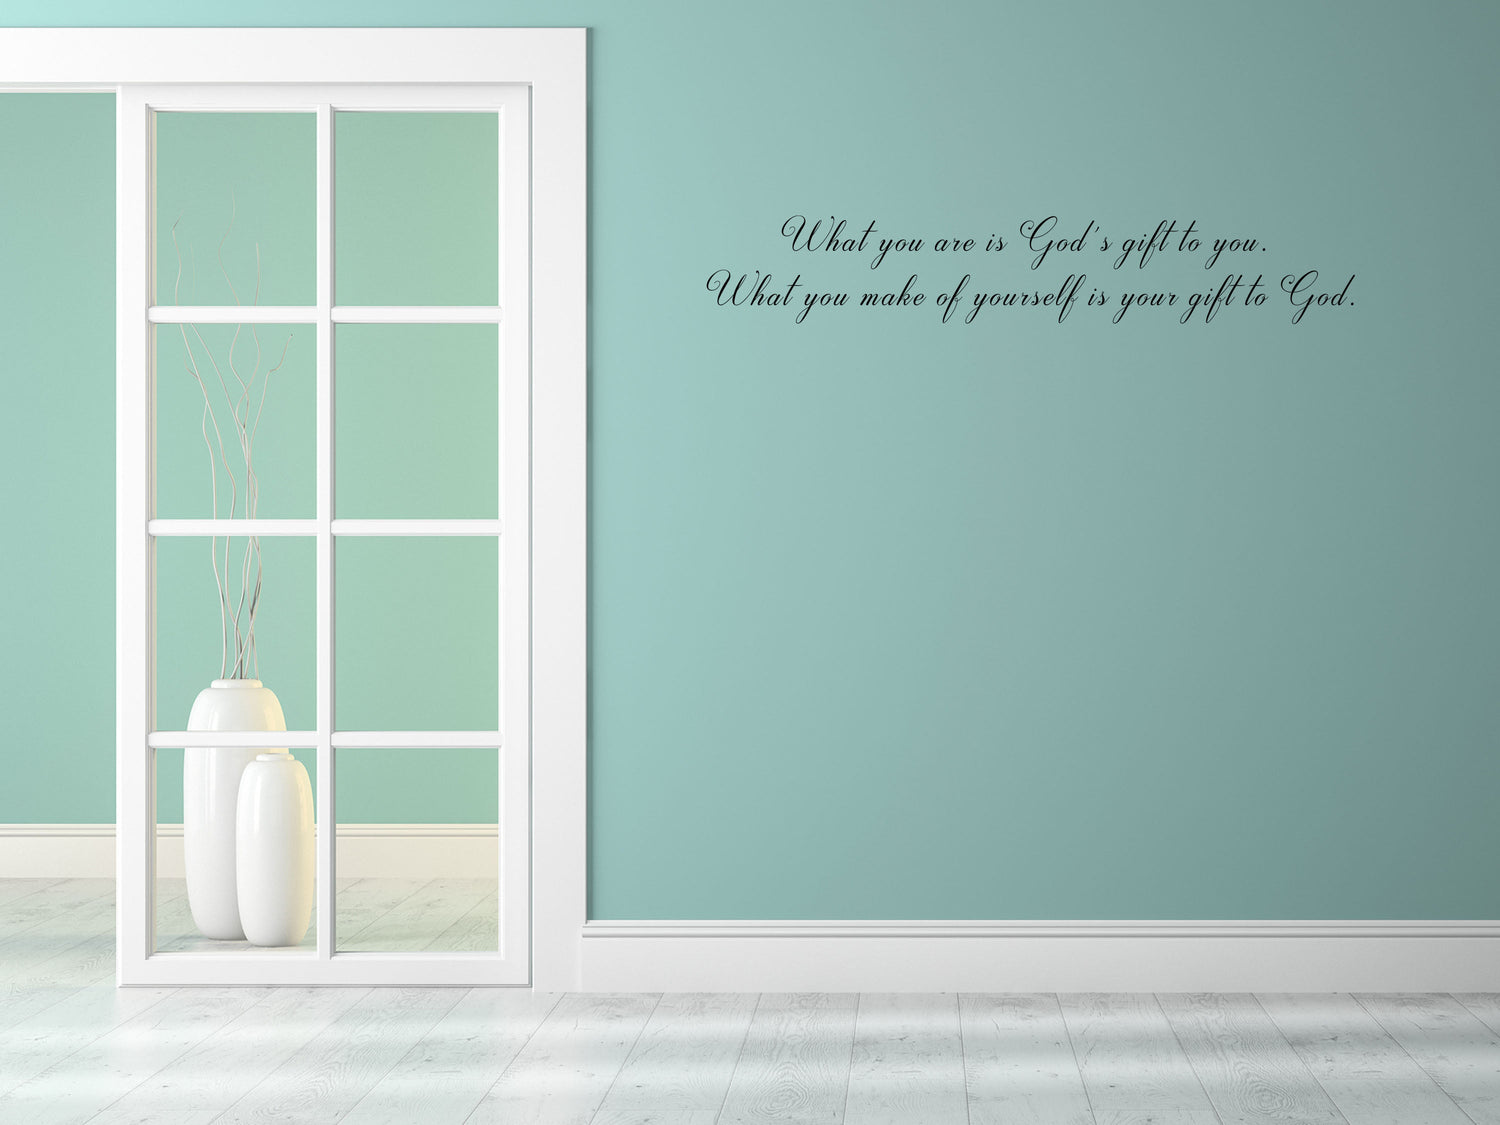 What You Are Is God's Gift To You - Inspirational Wall Decals Vinyl Wall Decal Inspirational Wall Signs 